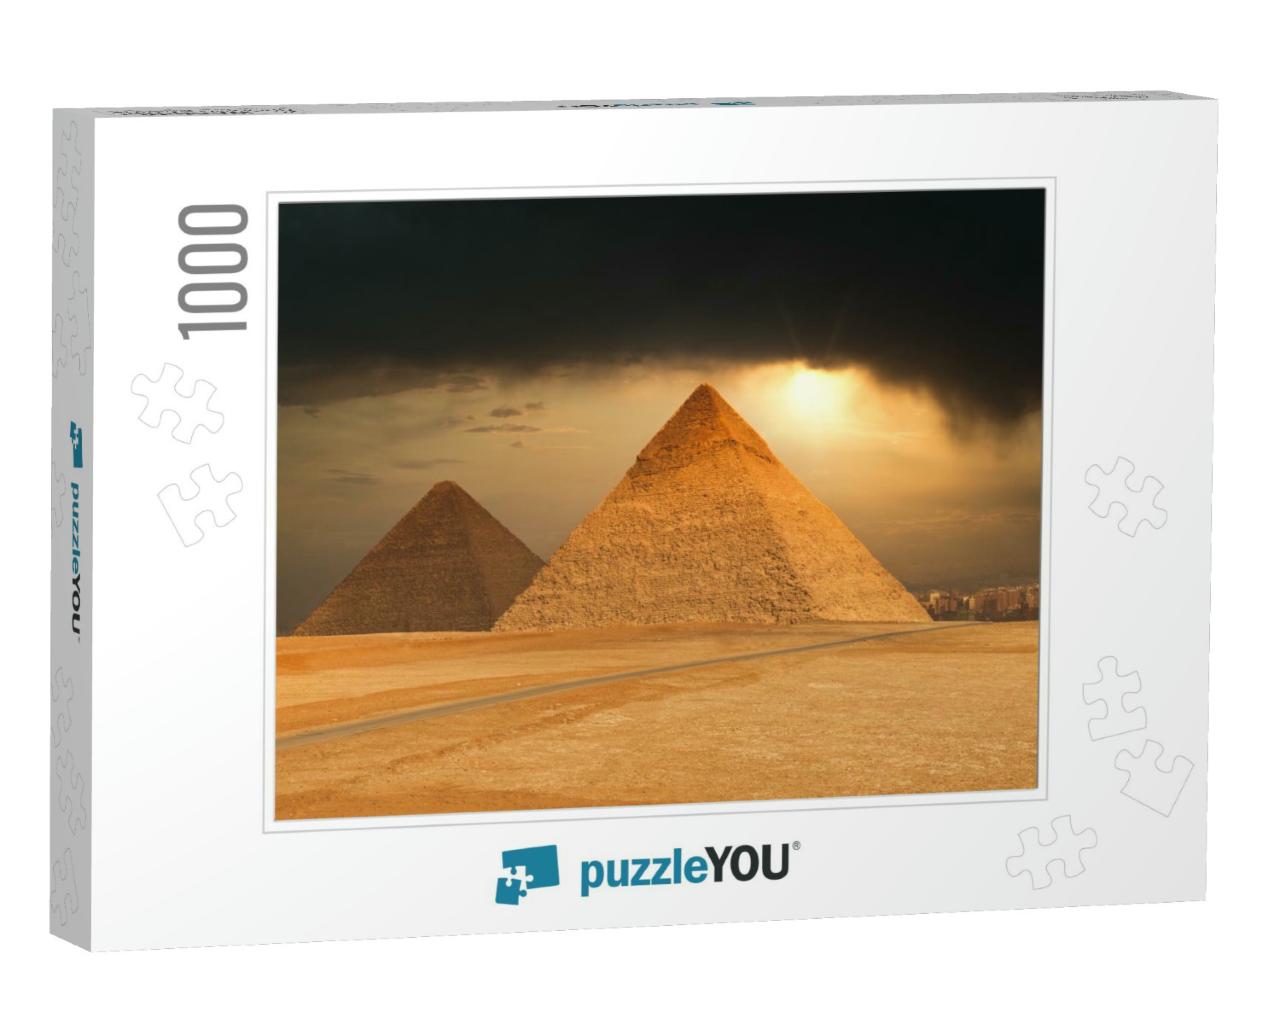 The Famous Pyramids At Giza in Egypt... Jigsaw Puzzle with 1000 pieces